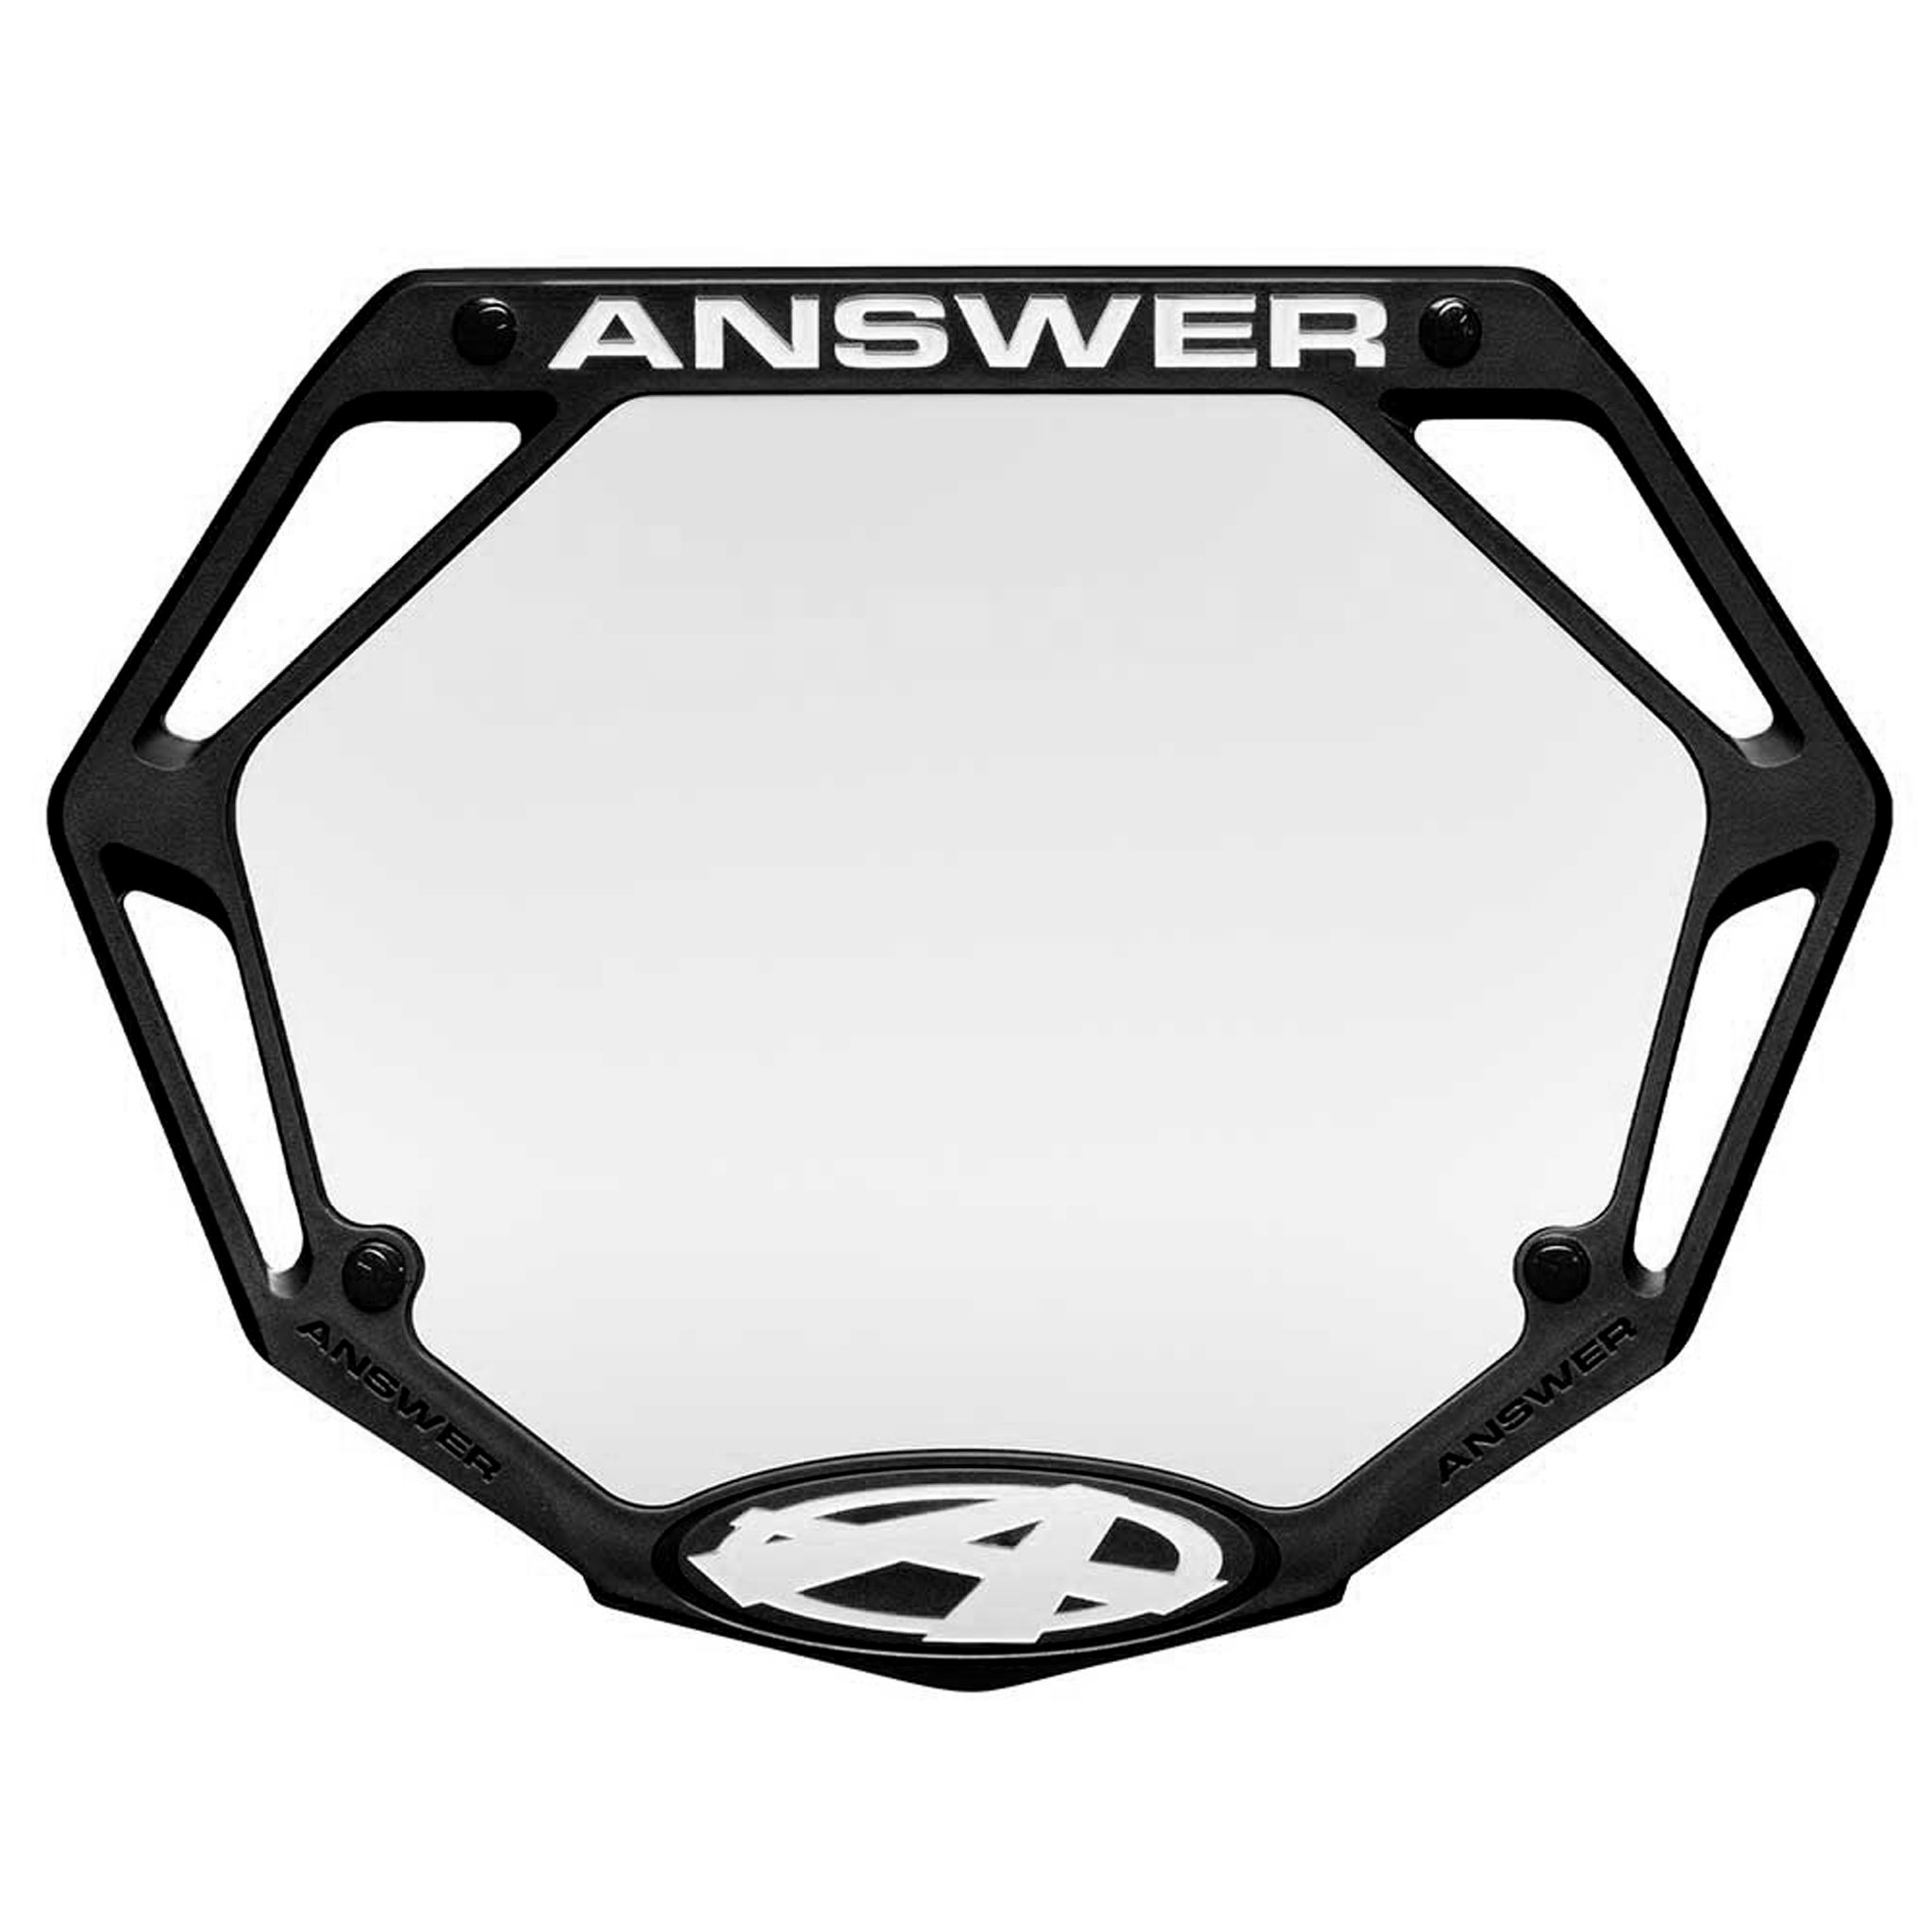 AnswerBMX 3D Number Plate, Pro, Black